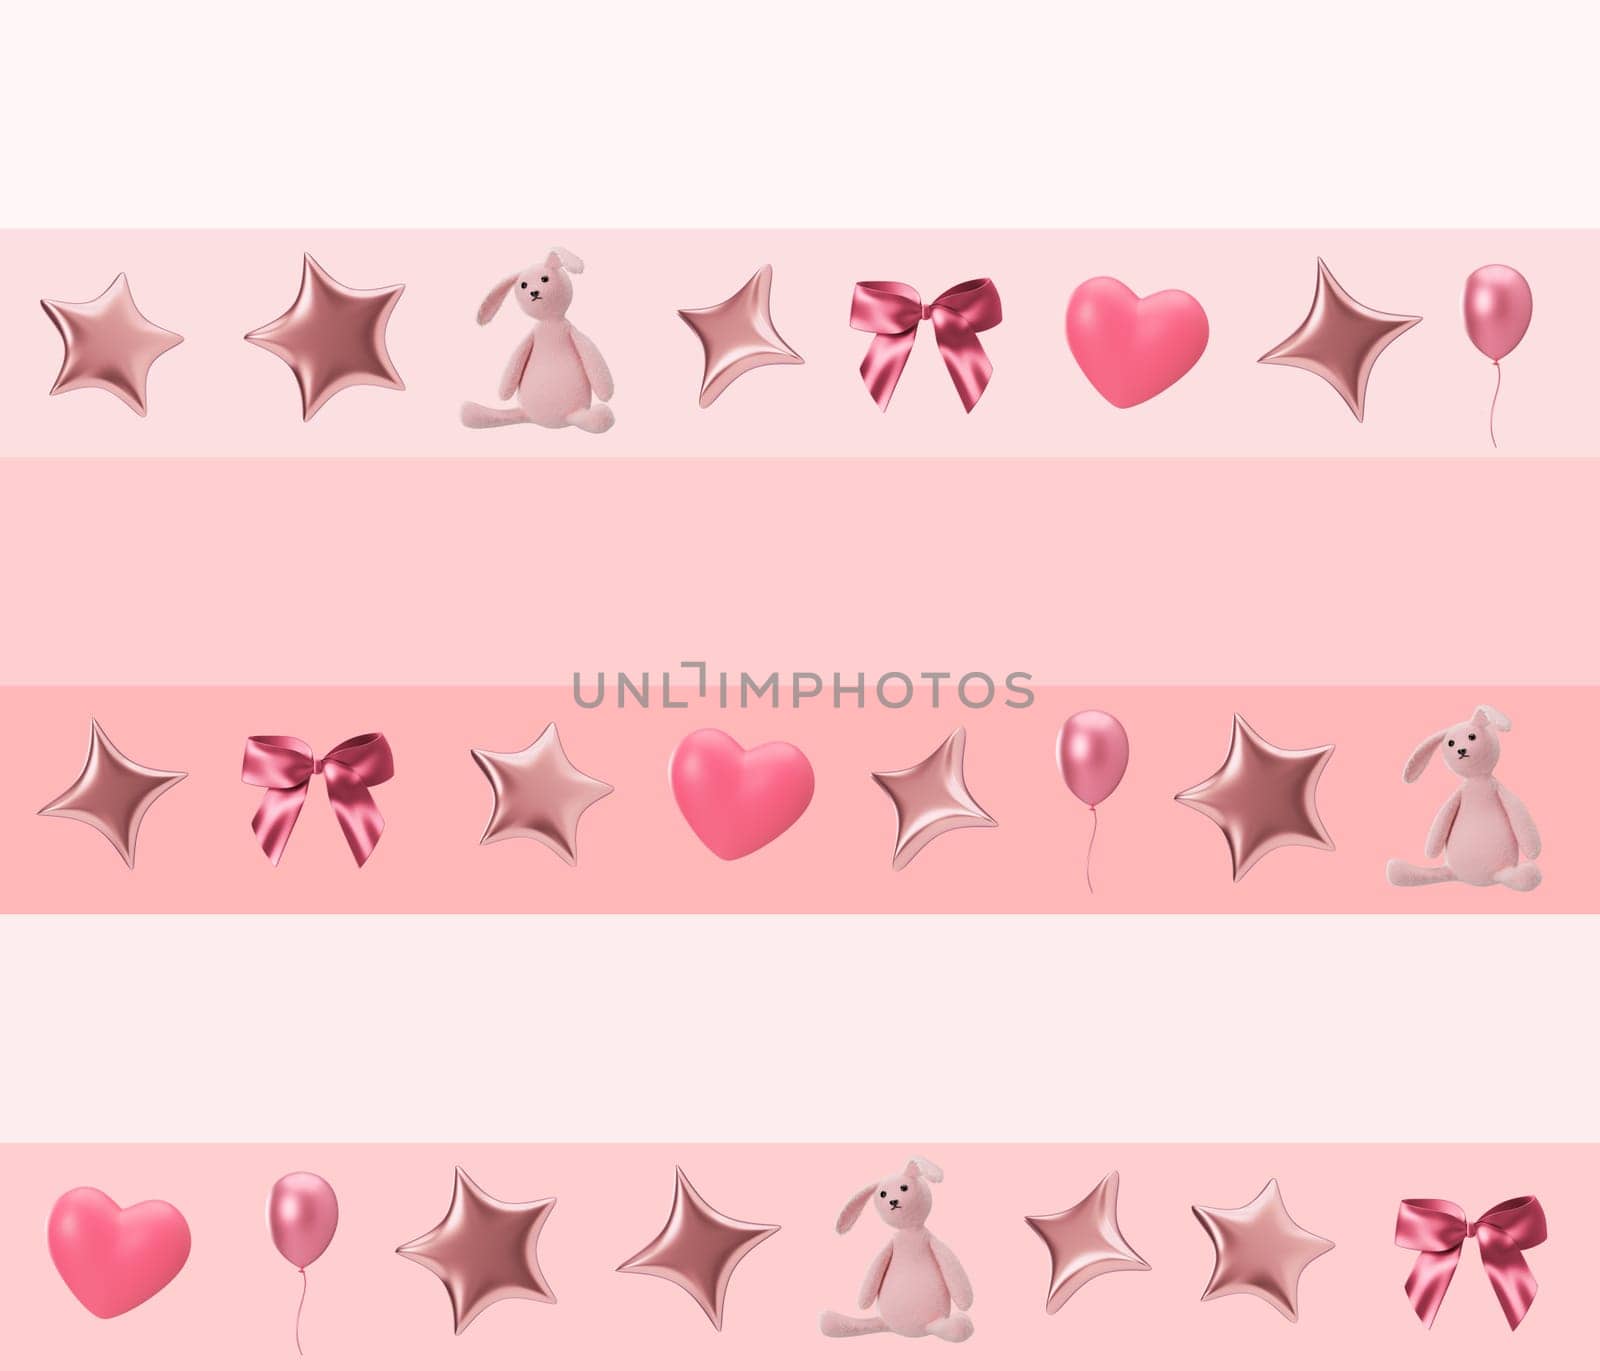 Pink seamless pattern with stars, hearts and bunnies. Applicable for fabric print, textile, wallpaper, gifts wrapping paper. Repeatable texture. Modern style, pattern for girls bedding, clothes. 3D